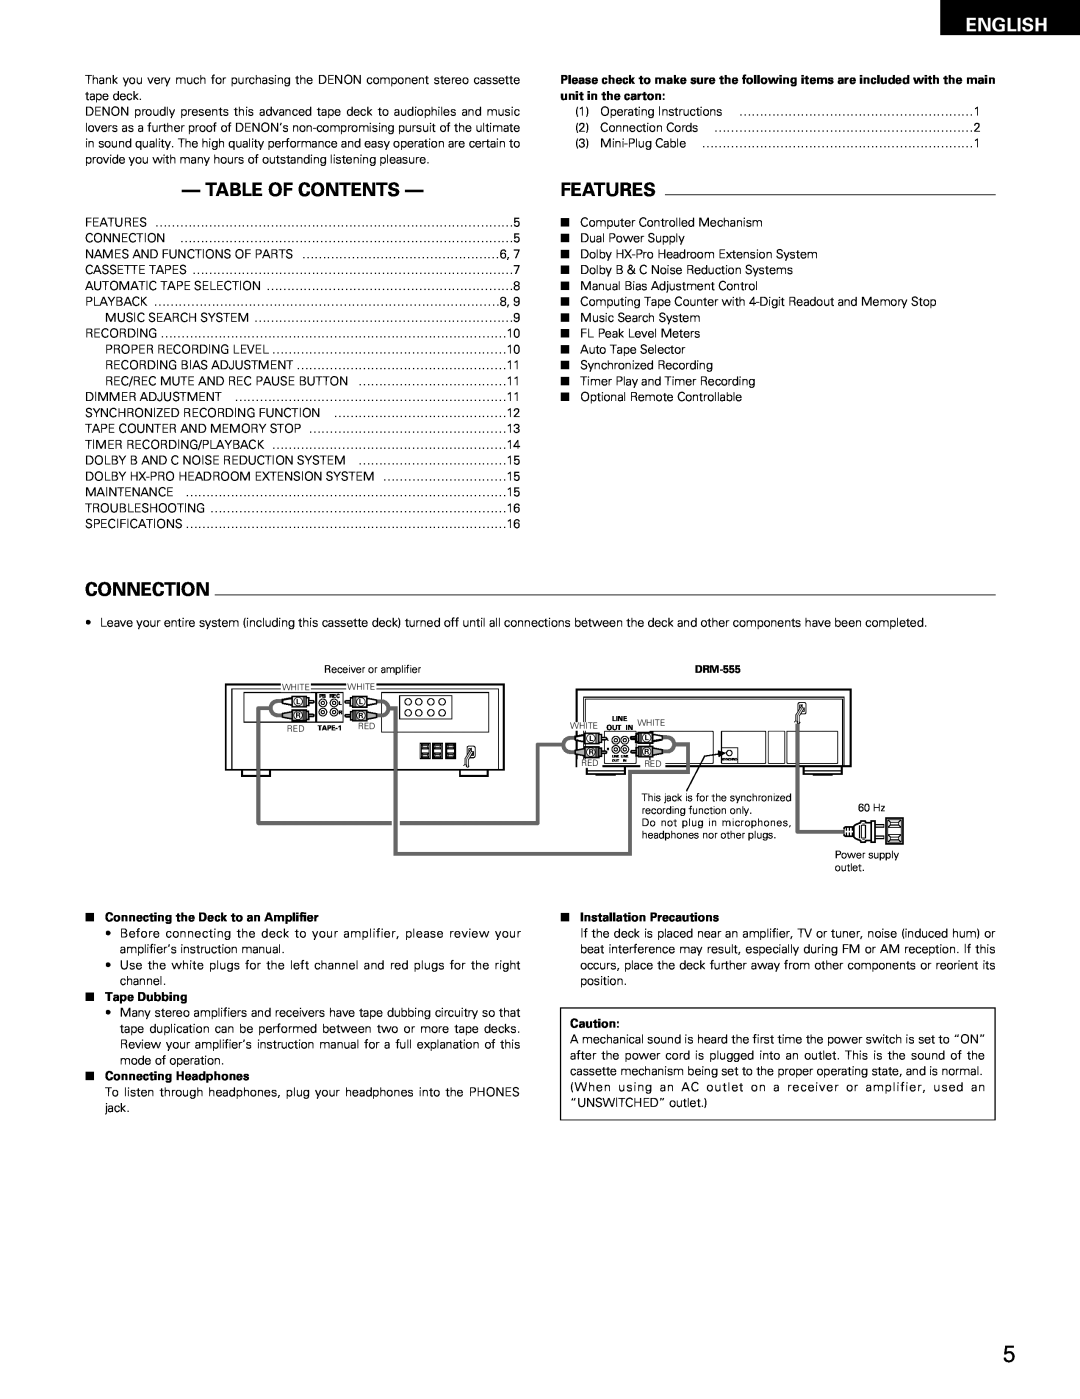 Denon DRM-555 English, Table Of Contents, Features, Connection, unit in the carton, Connecting the Deck to an Amplifier 